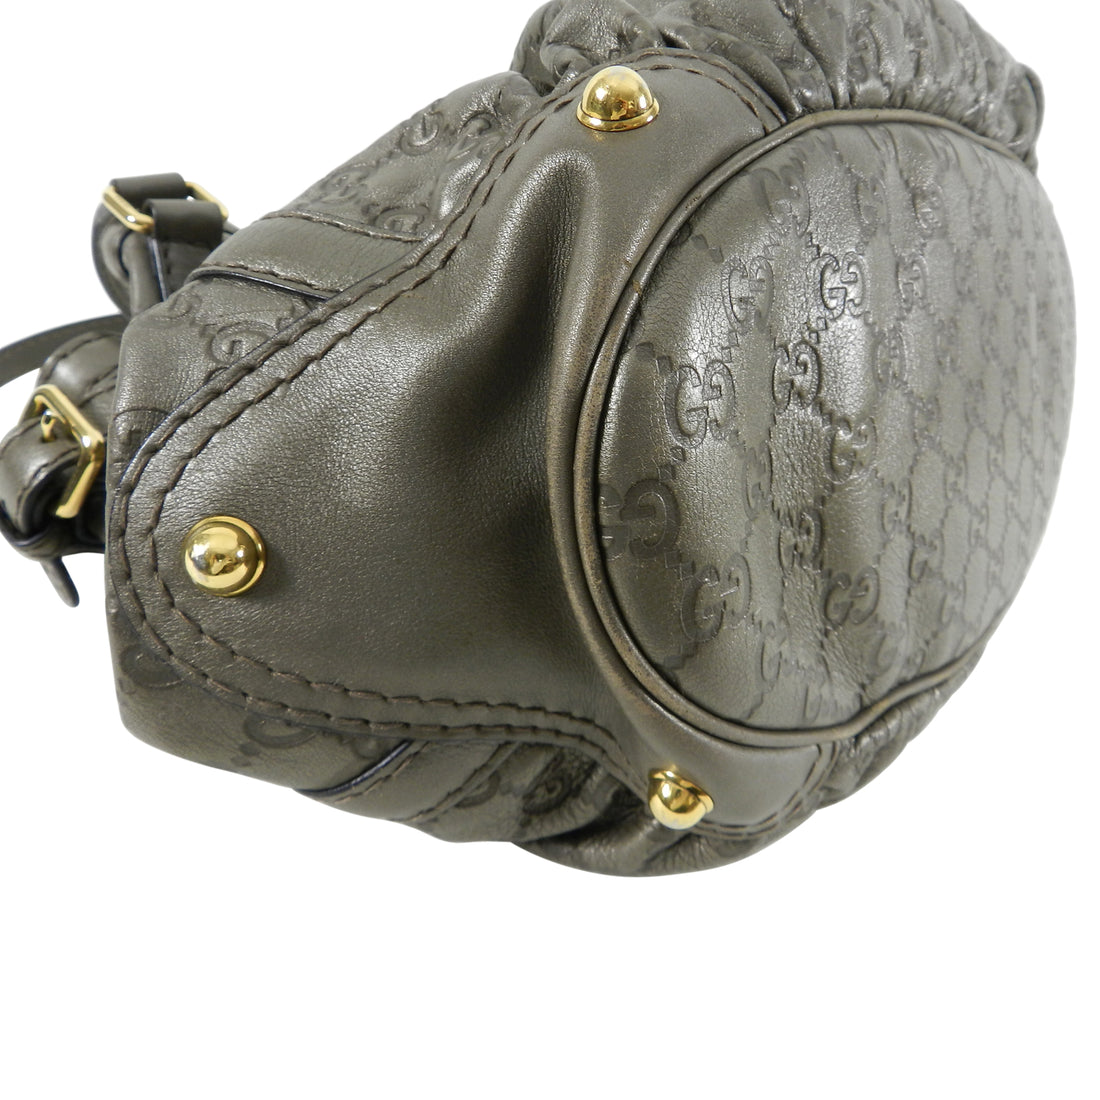 Gucci Guccissima Pewter Leather Monogram Hobo Bag with Gold Tone Hardware 